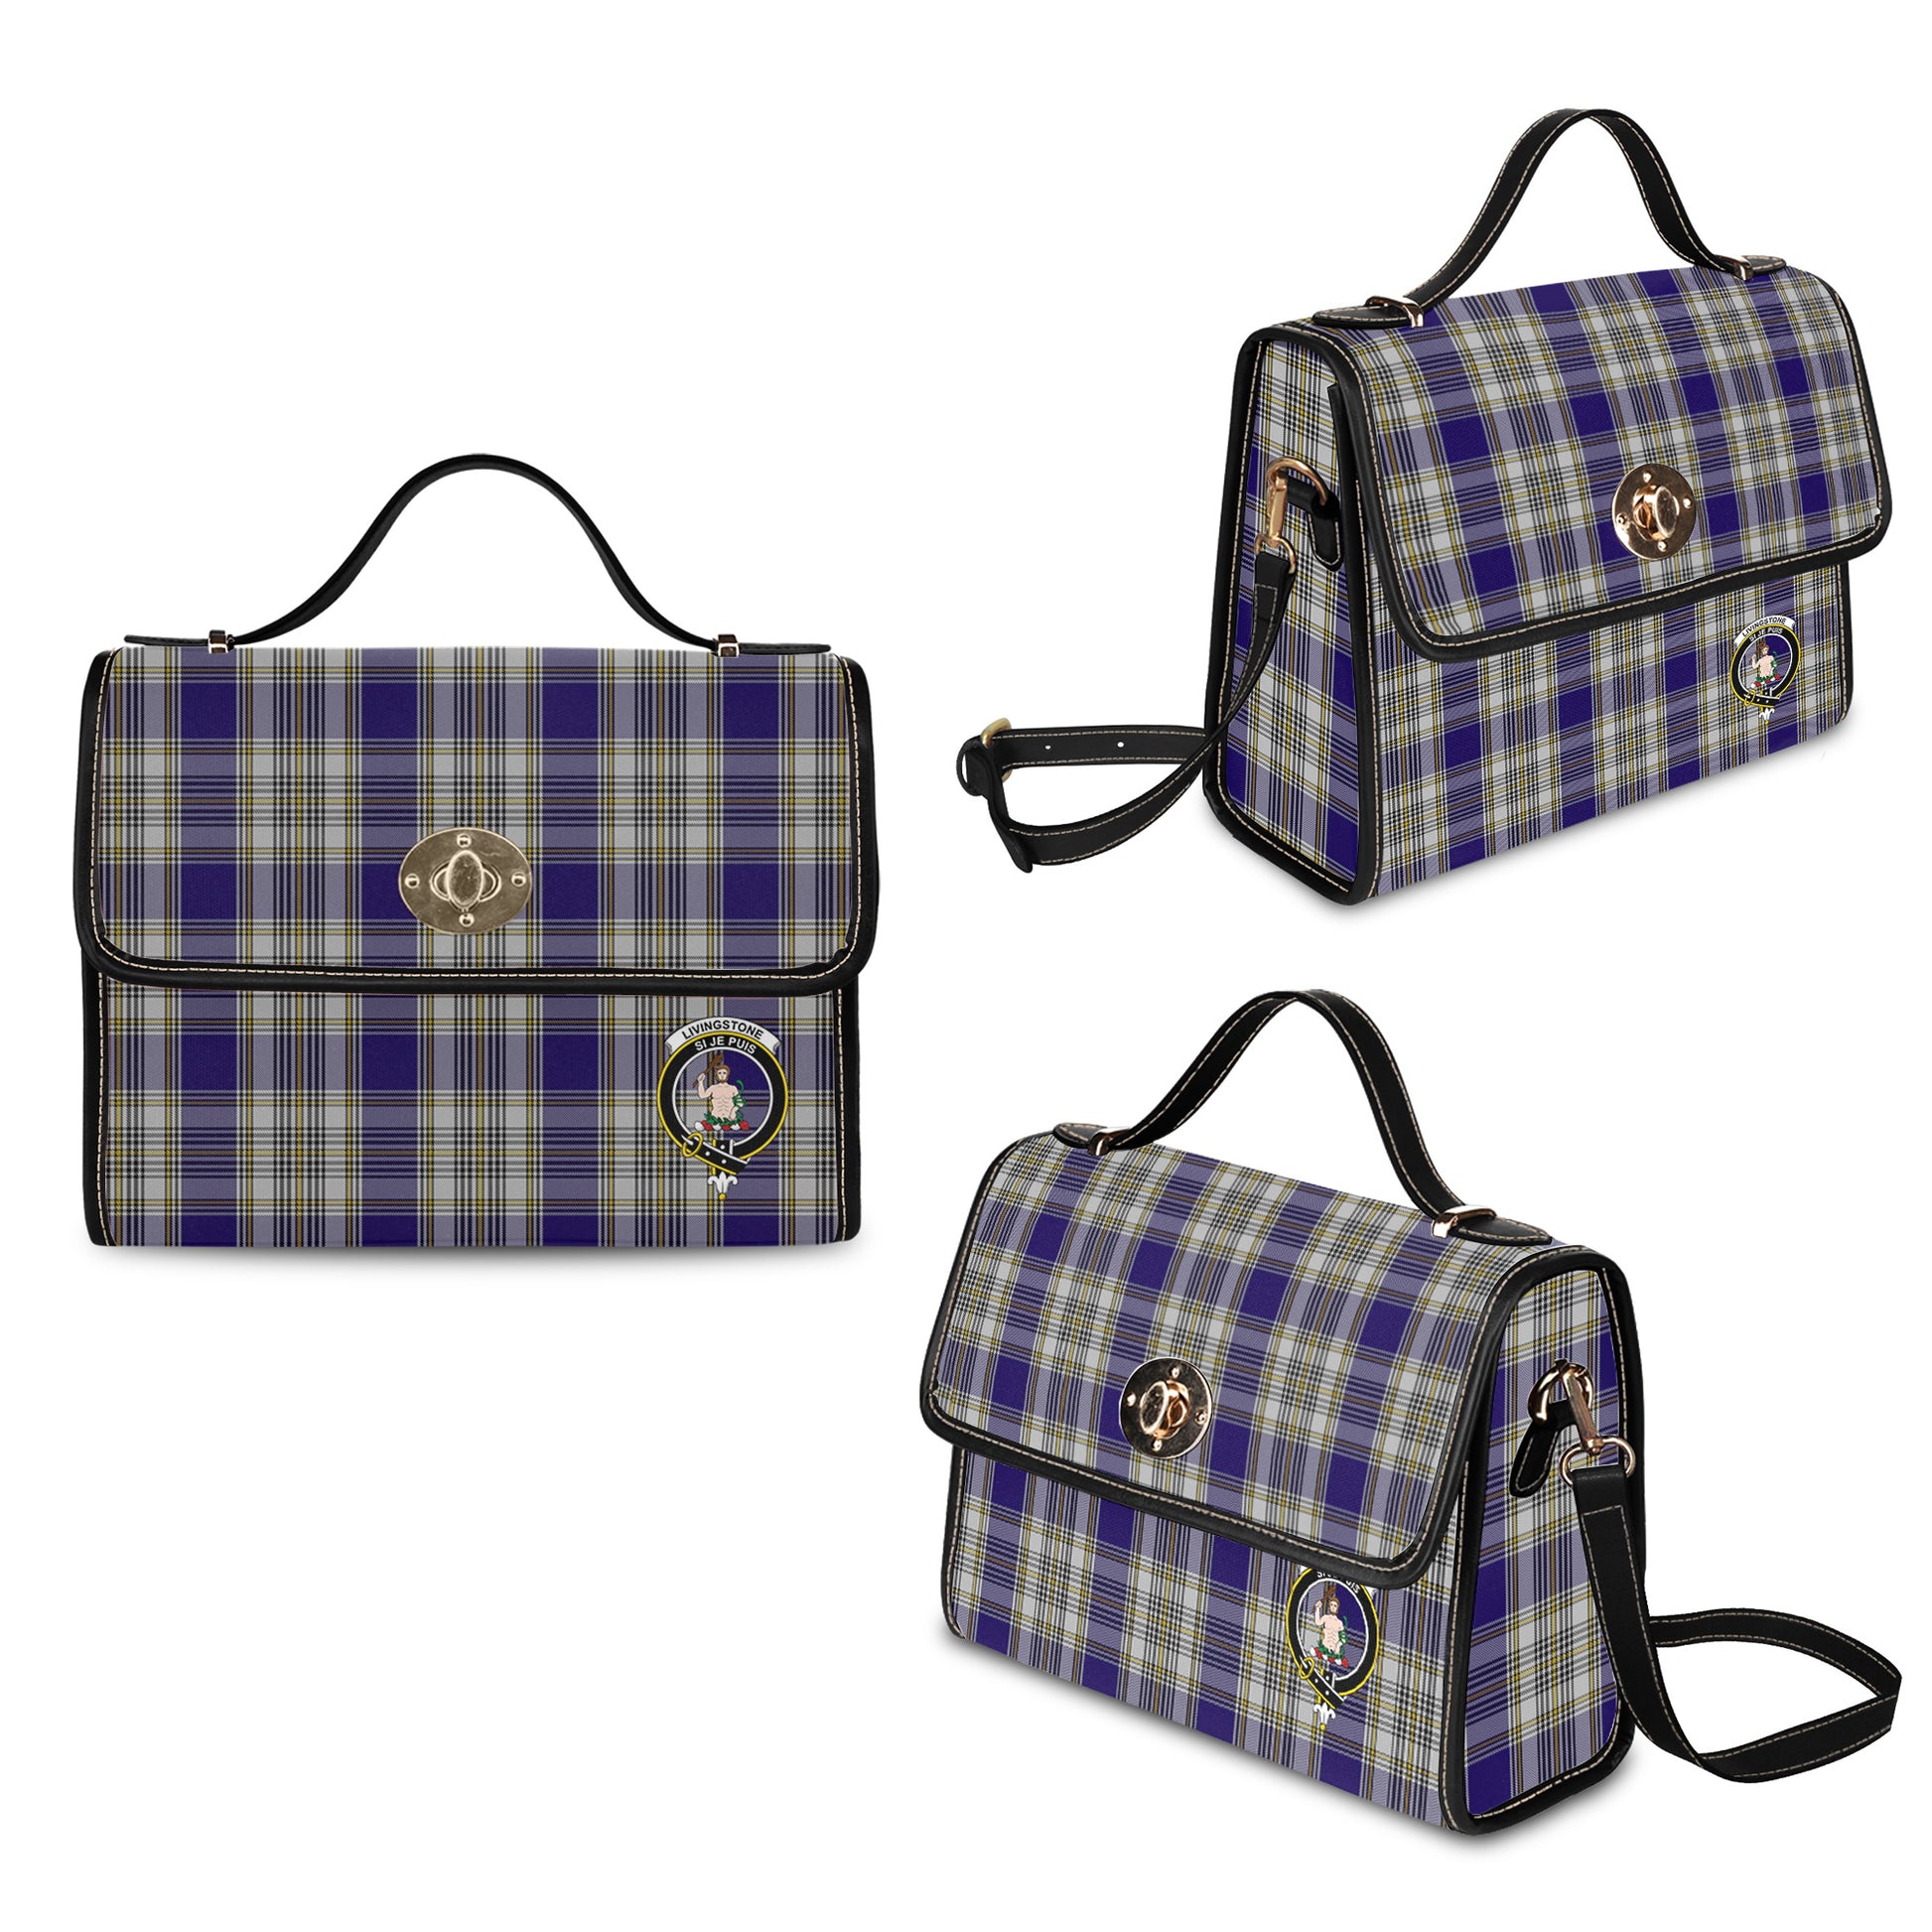 livingston-dress-tartan-leather-strap-waterproof-canvas-bag-with-family-crest